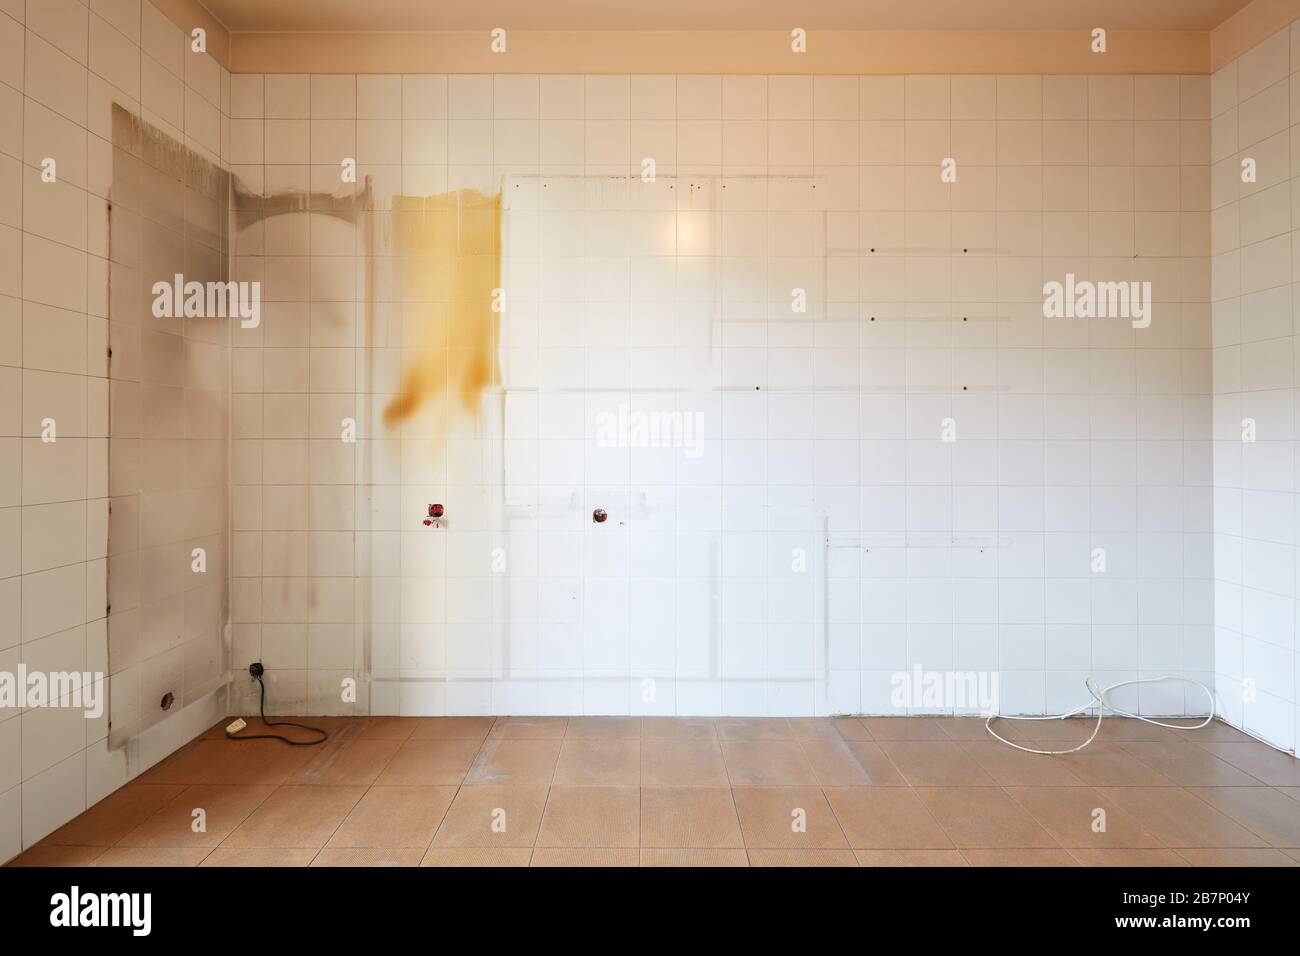 Empty, old kitchen interior with stained, tiled wall Stock Photo